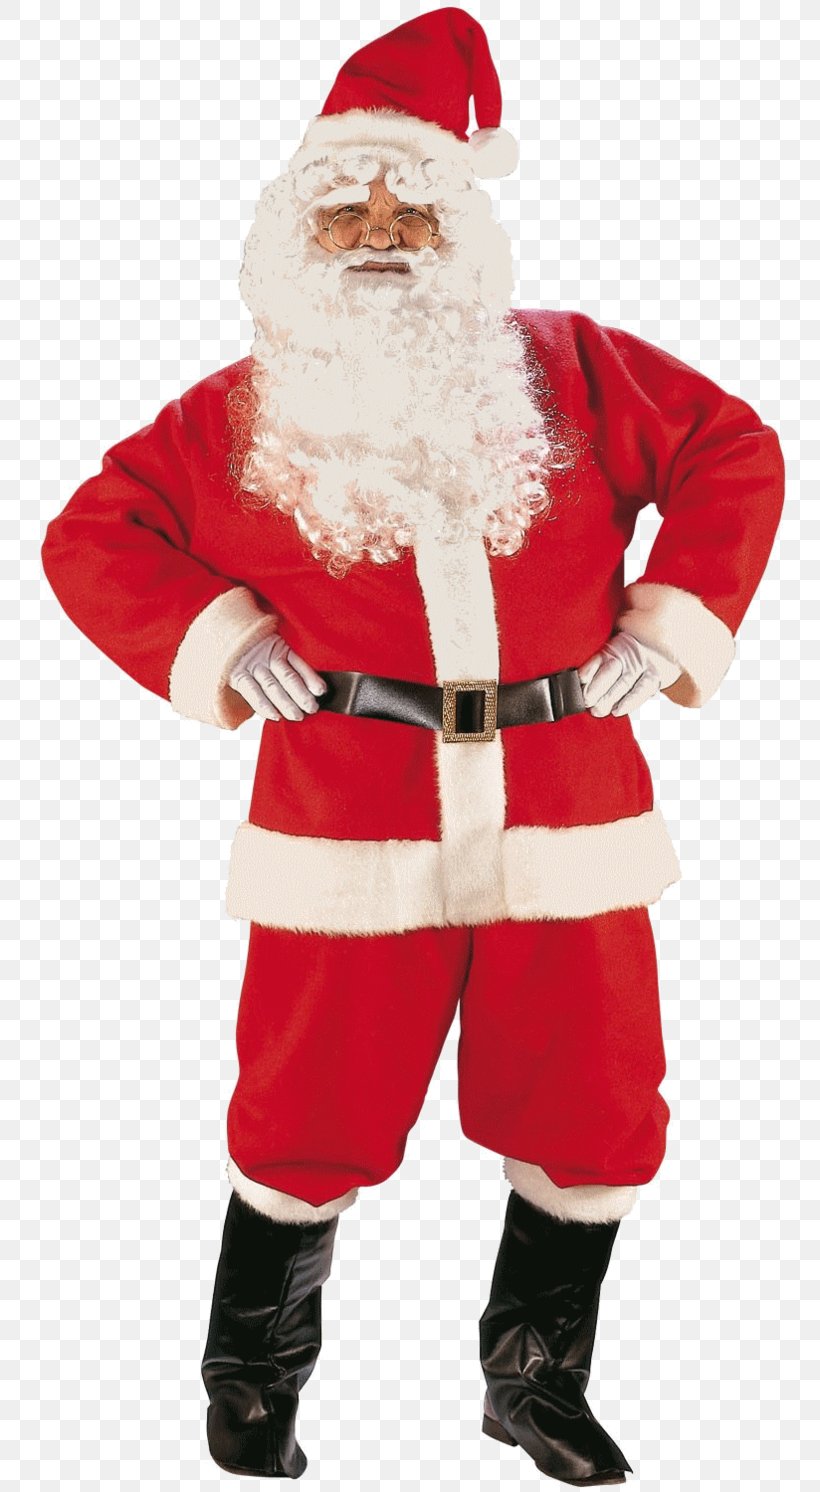 Santa Claus Costume Party Christmas, PNG, 800x1492px, Santa Claus, Christmas, Christmas Ornament, Clothing, Clothing Accessories Download Free